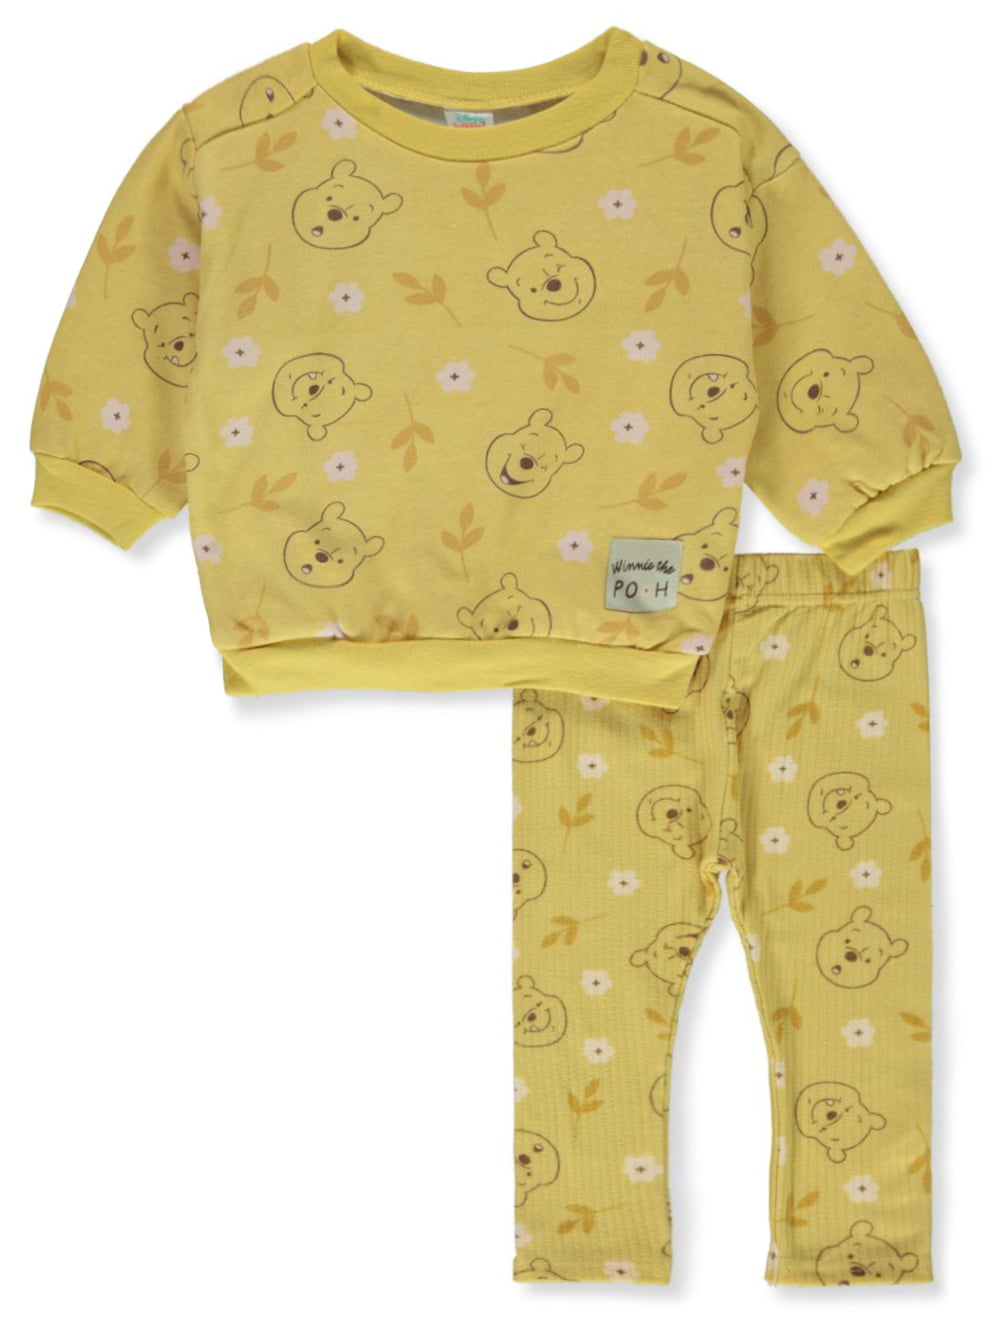 Beautiful Yellow Natural Hamper New Baby Gift New Baby Maternity Leave Present Baby Shower Gift Clothing Unisex Kids Clothing Unisex Baby Clothing Clothing Sets Stunning Winnie The Pooh Unisex Hamper 